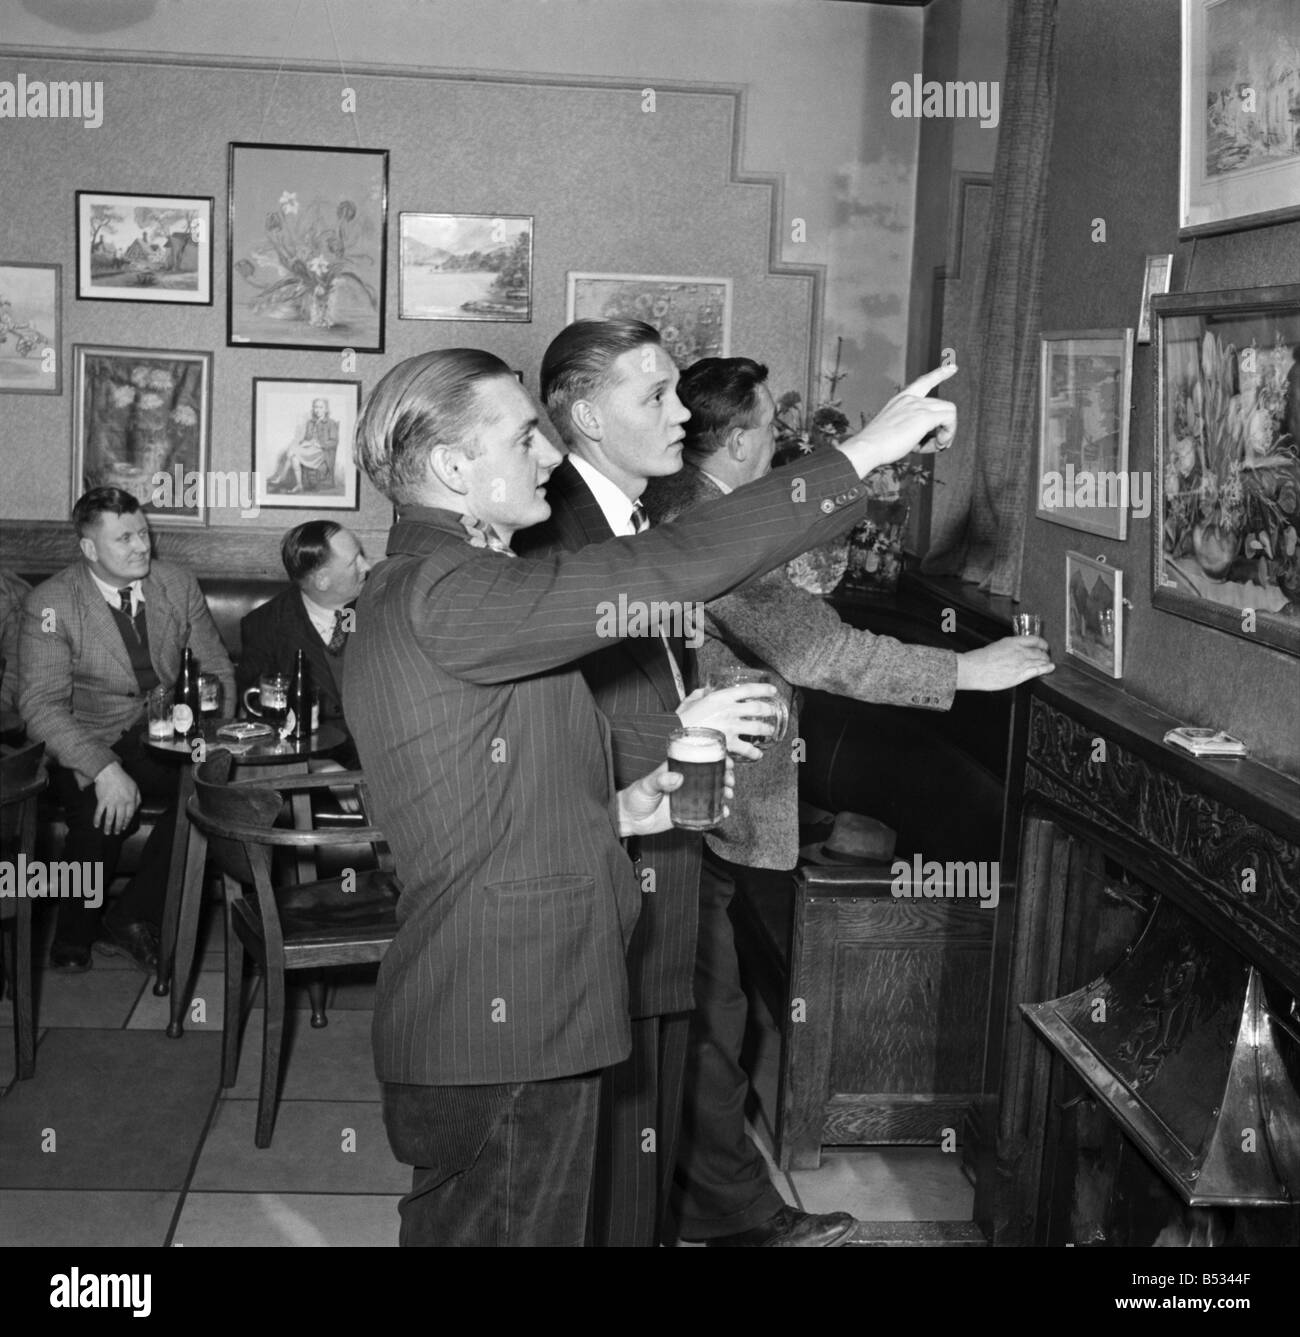 Norman Kenny of Sharston, Wythenshawe, discusses the finer points of art with some of the customers at the Airport Hotel, Ringway in Cheshire, whilst others, accustomed to the evening critics, carry on with their own particular discussion and pint. ;April 1952 ;C1330 Stock Photo